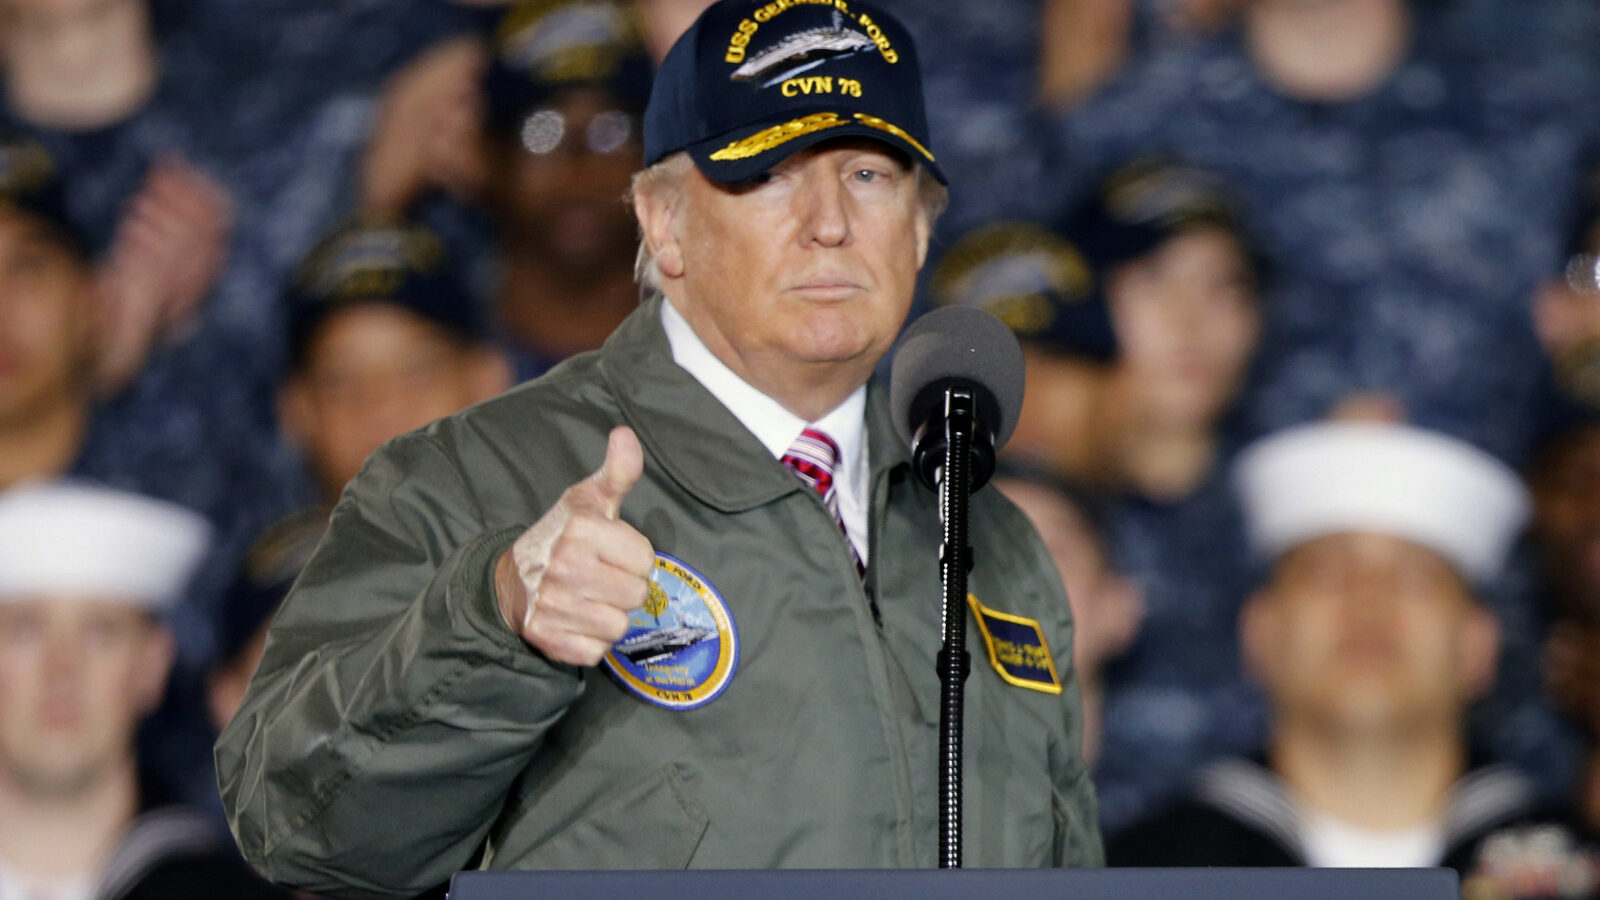 President Donald Trump gives a thumbs up after speaking to Navy and shipyard personnel aboard nuclear aircraft carrier Gerald R. Ford at Newport News Shipbuilding in Newport News, Va., Thursday, March 2, 2017. (AP/Steve Helber)